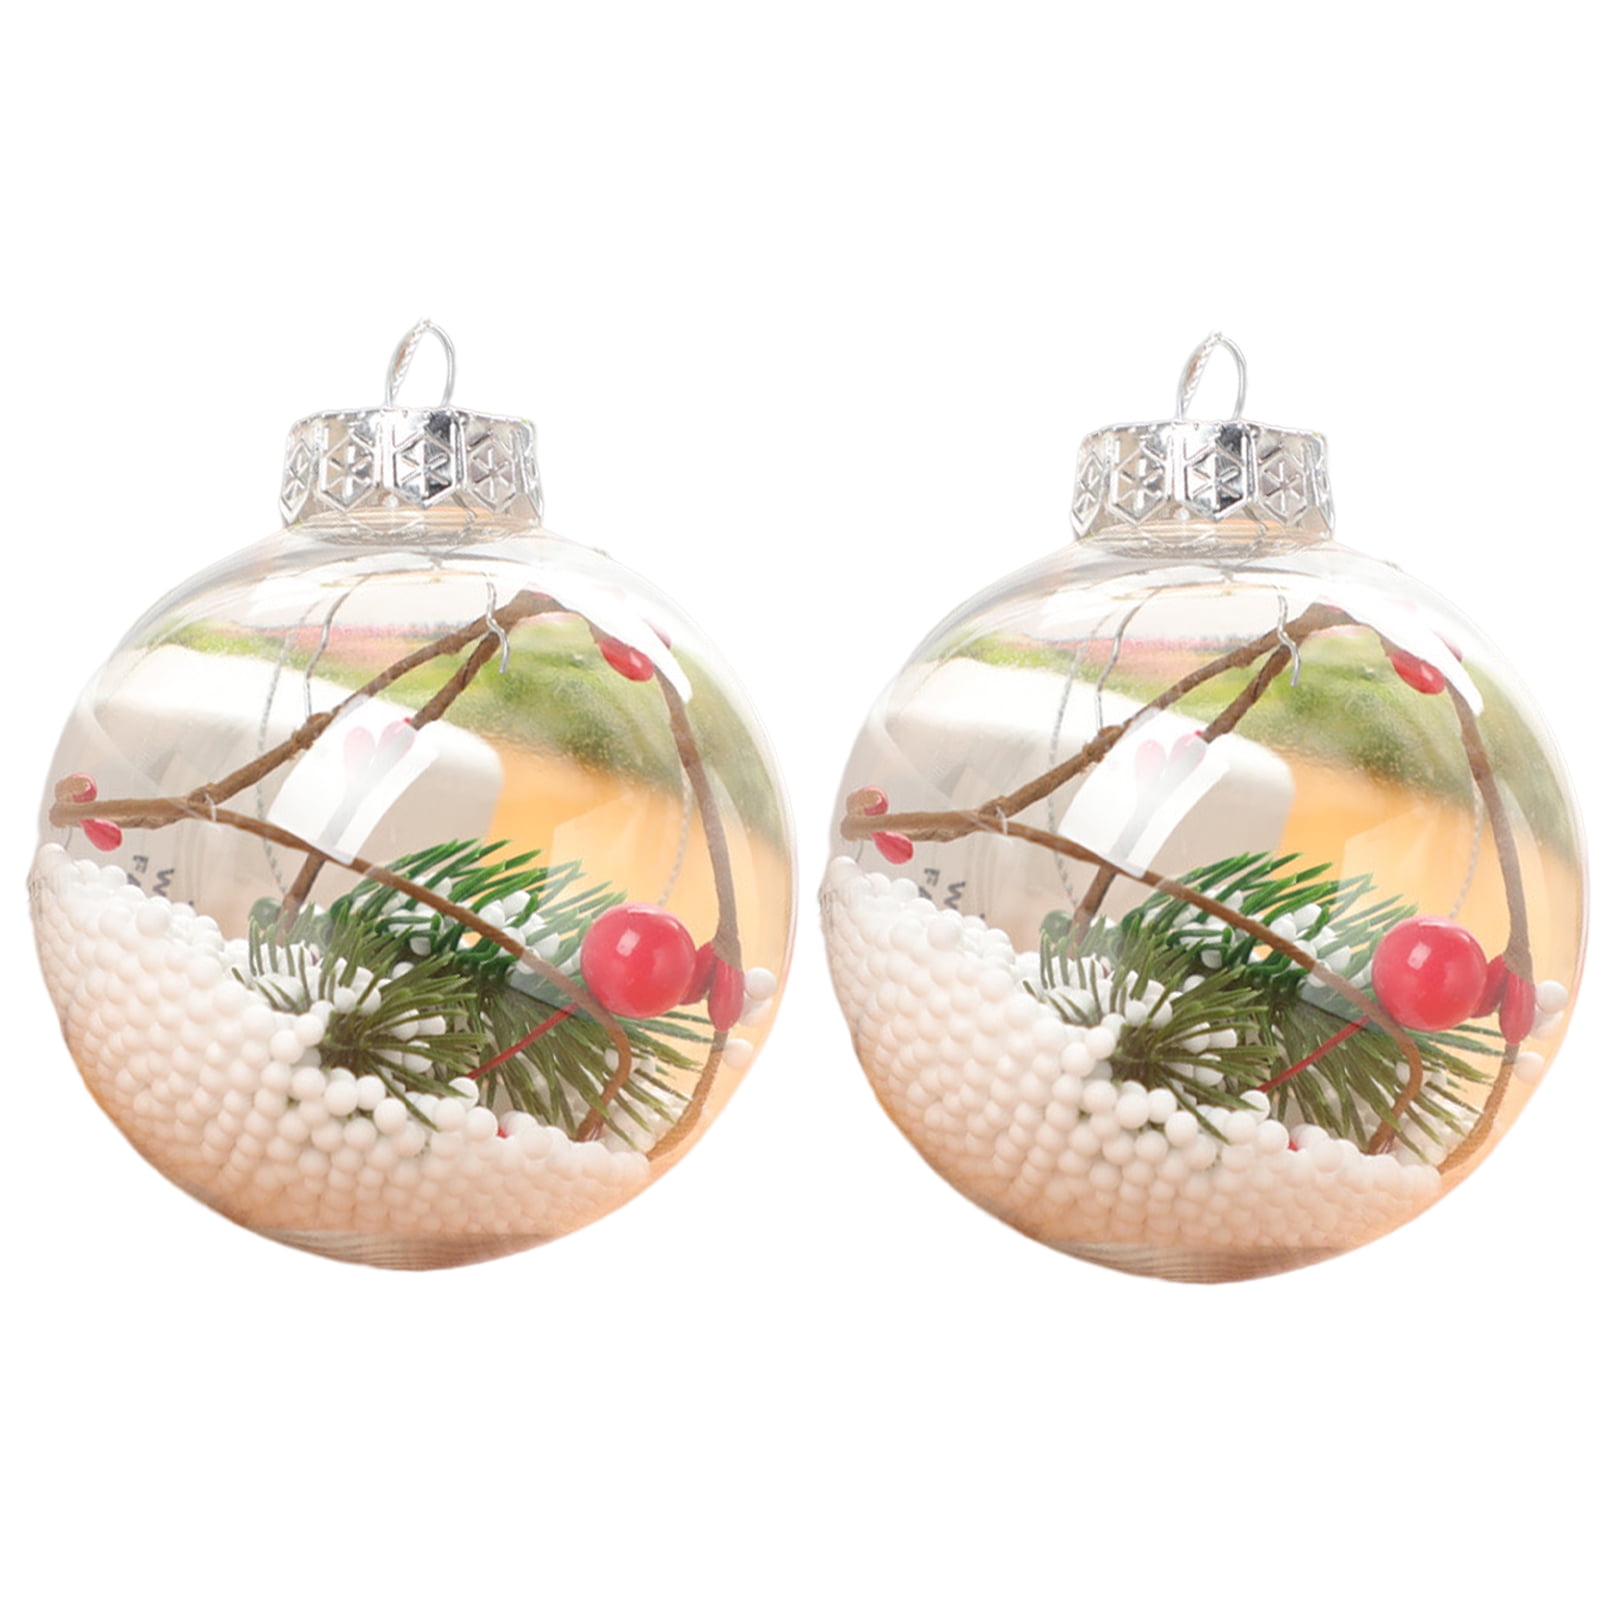 Liliful 48 Pcs Clear Christmas Ornaments Fillable Ball Ornament Set  3.15/2.76/2.36/1.97 Inch Christmas Pine Cones Baubles and Various  Accessories for